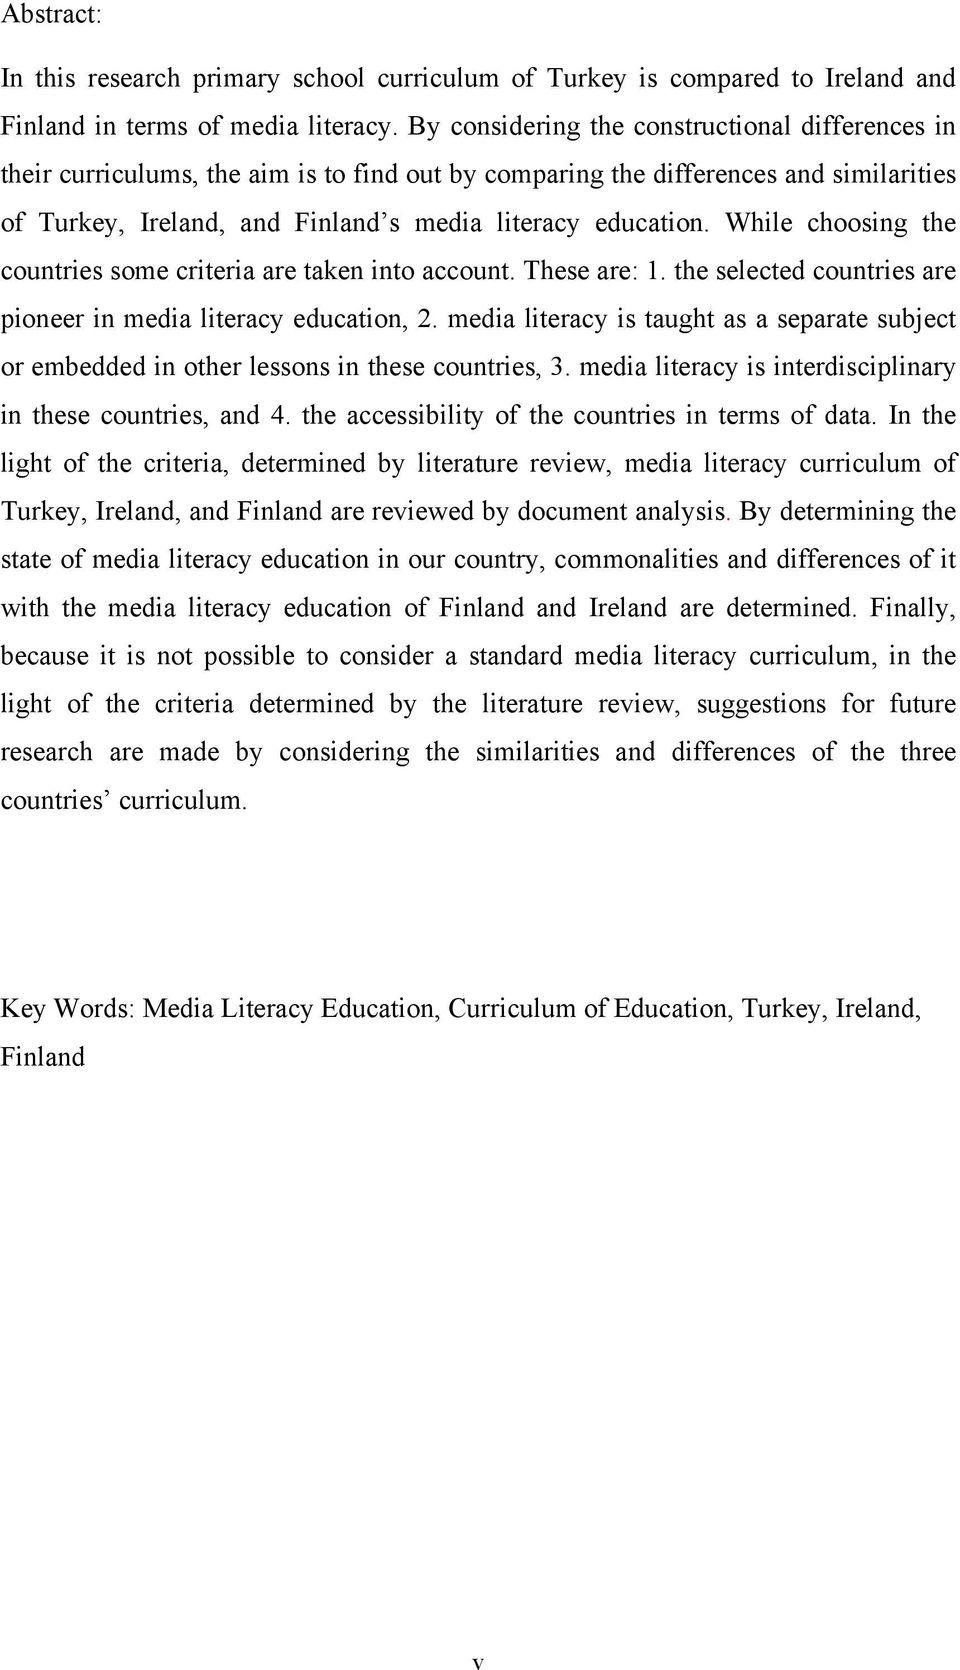 While choosing the countries some criteria are taken into account. These are: 1. the selected countries are pioneer in media literacy education, 2.